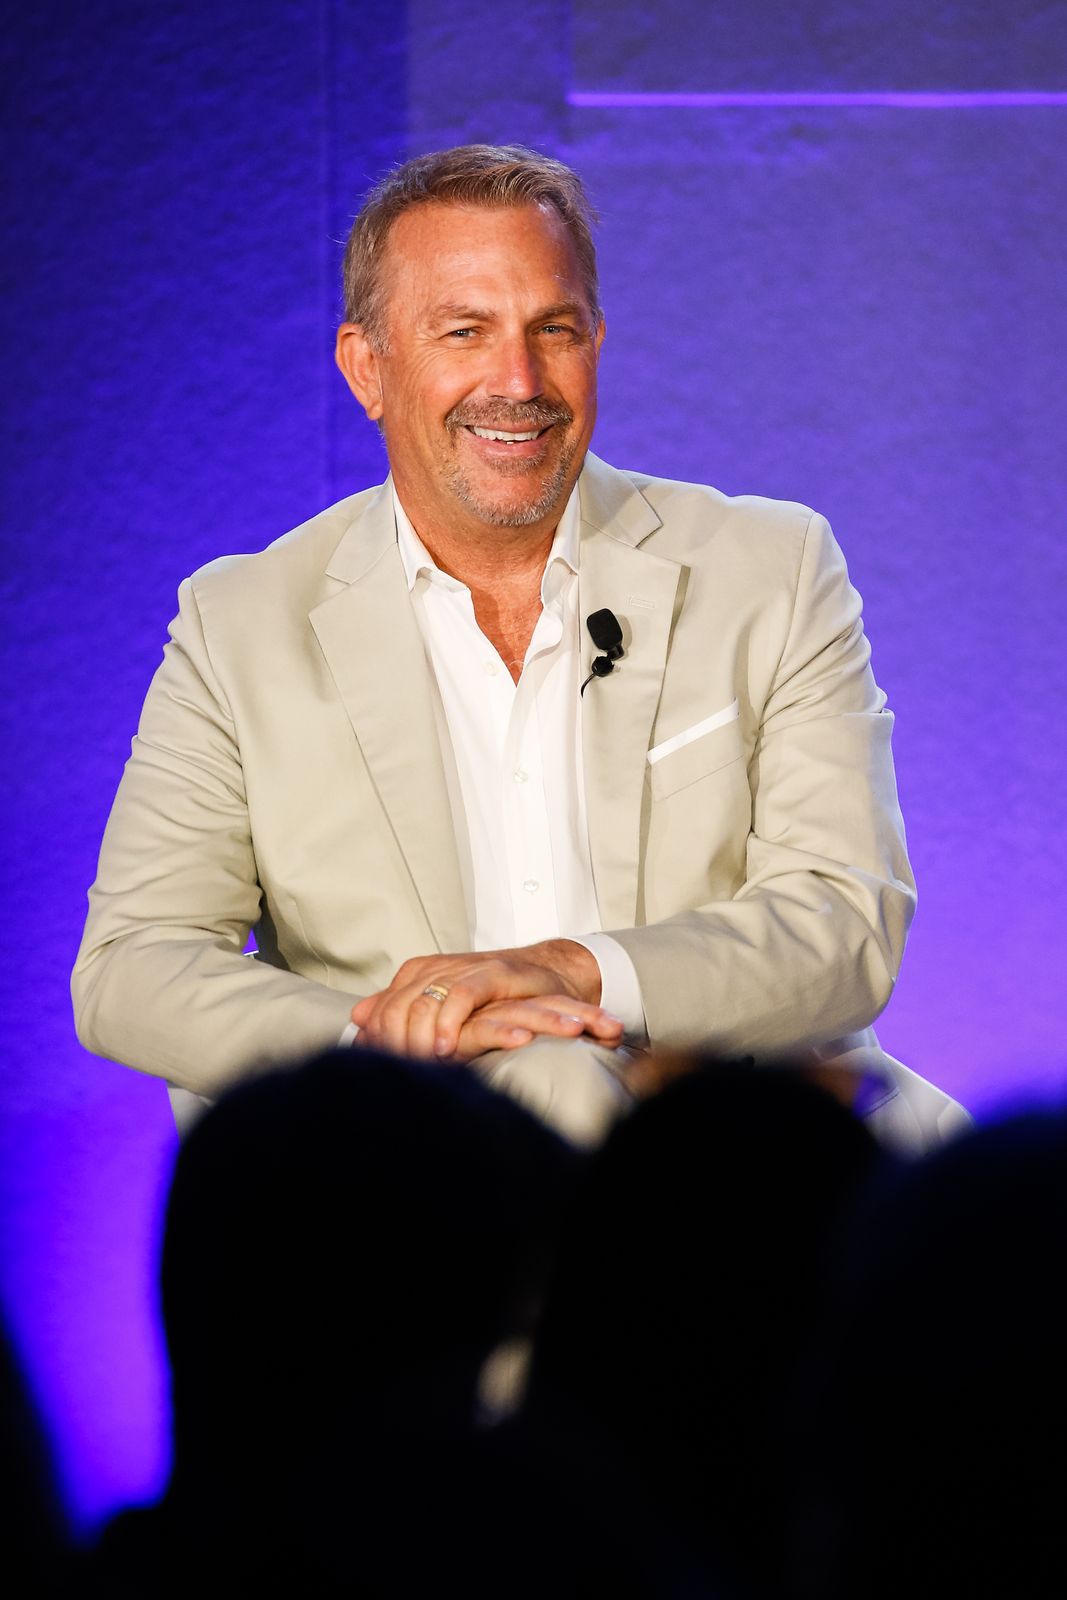 Kevin Costner during "A conversation with Kevin Costner from Paramount Network and Yellowstone" at the Cannes Lions Festival on June 21, 2018, in France | Photo: Richard Bord/Getty Images